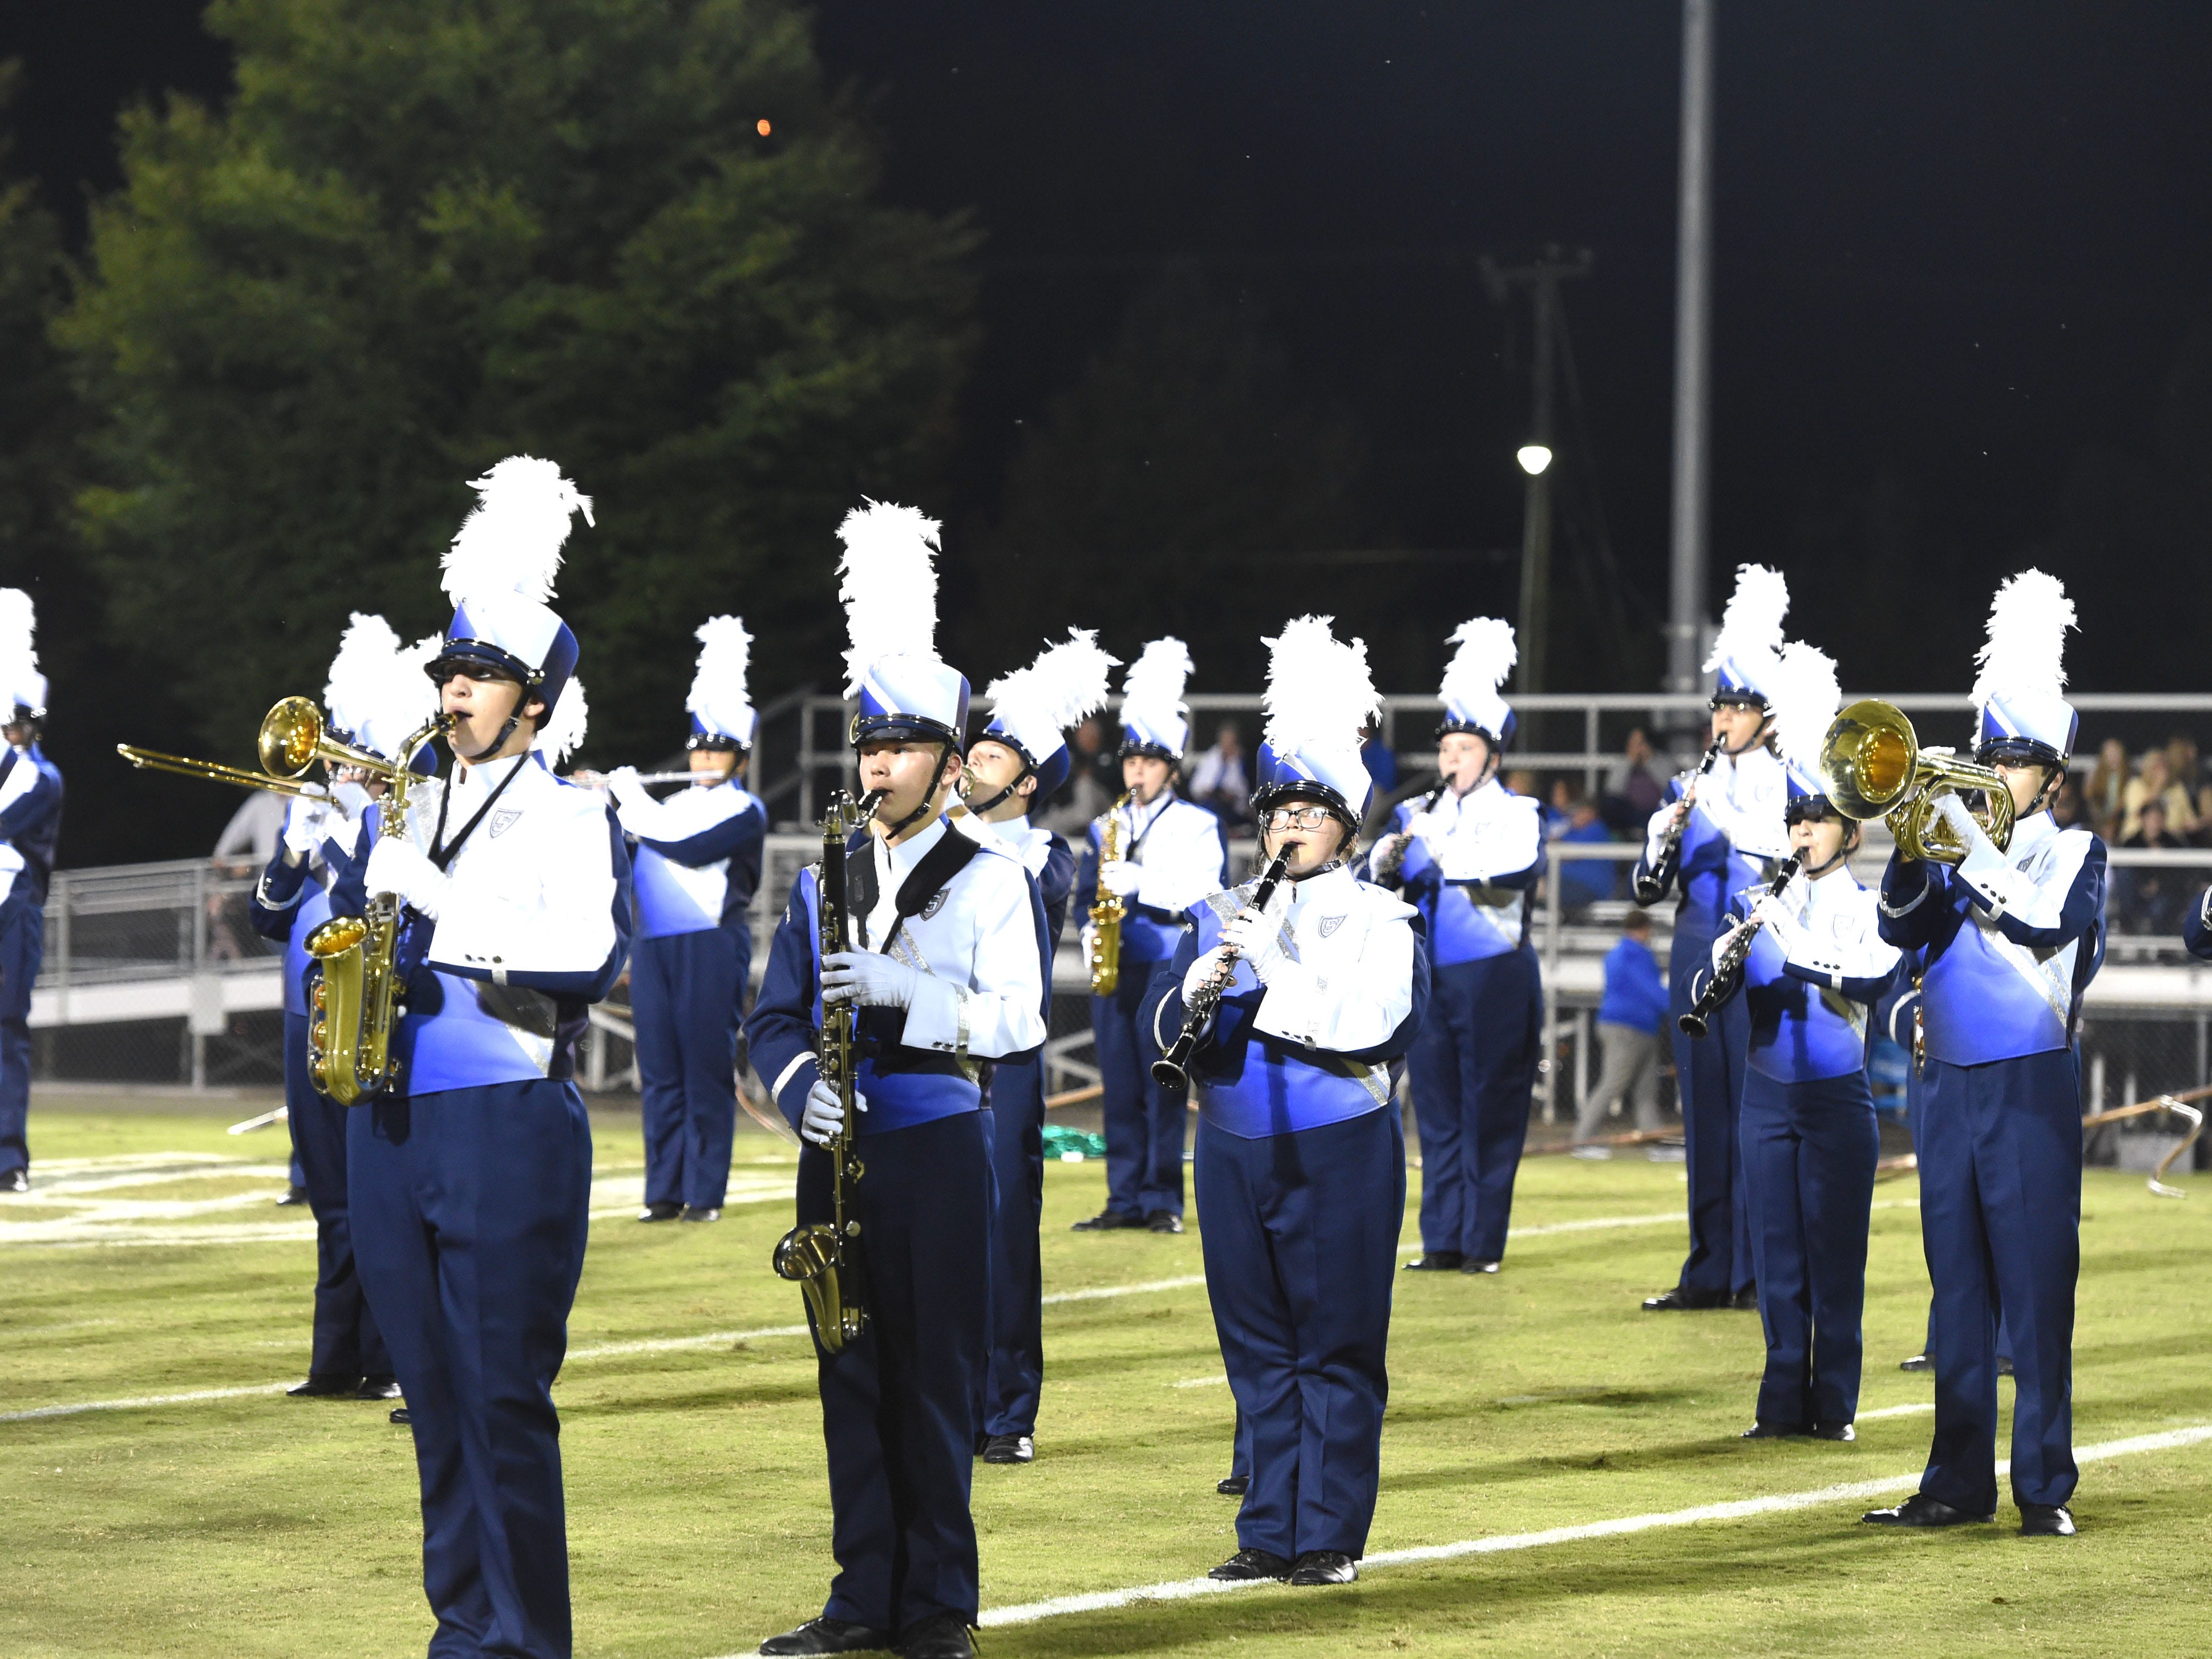 Marching into the unknown: High school bands planning for life with COVID-19